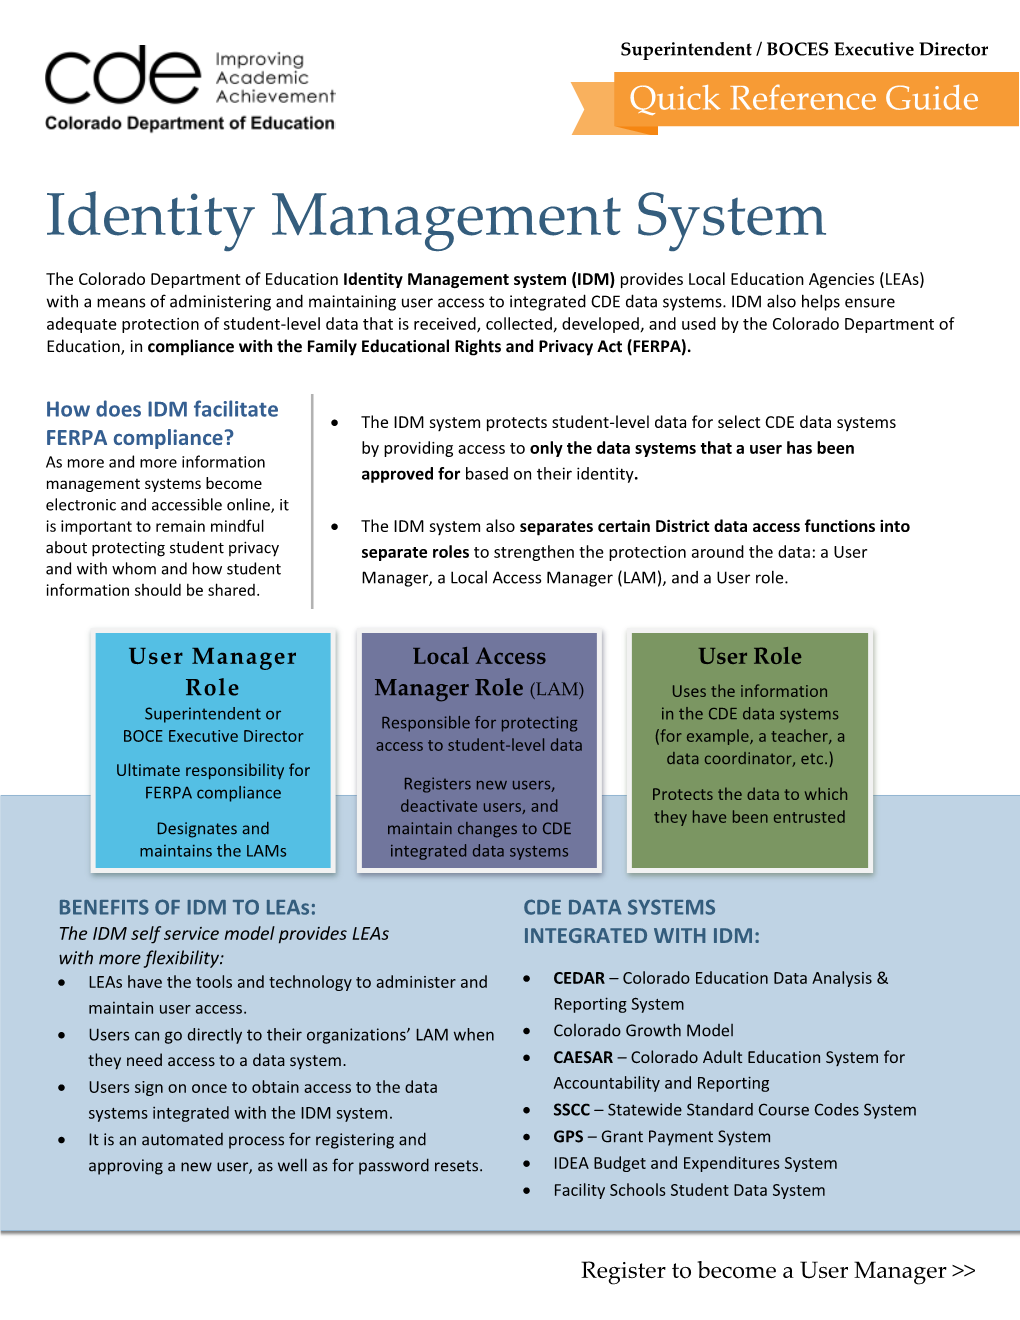 Identity Management System Quick Reference Guide 2